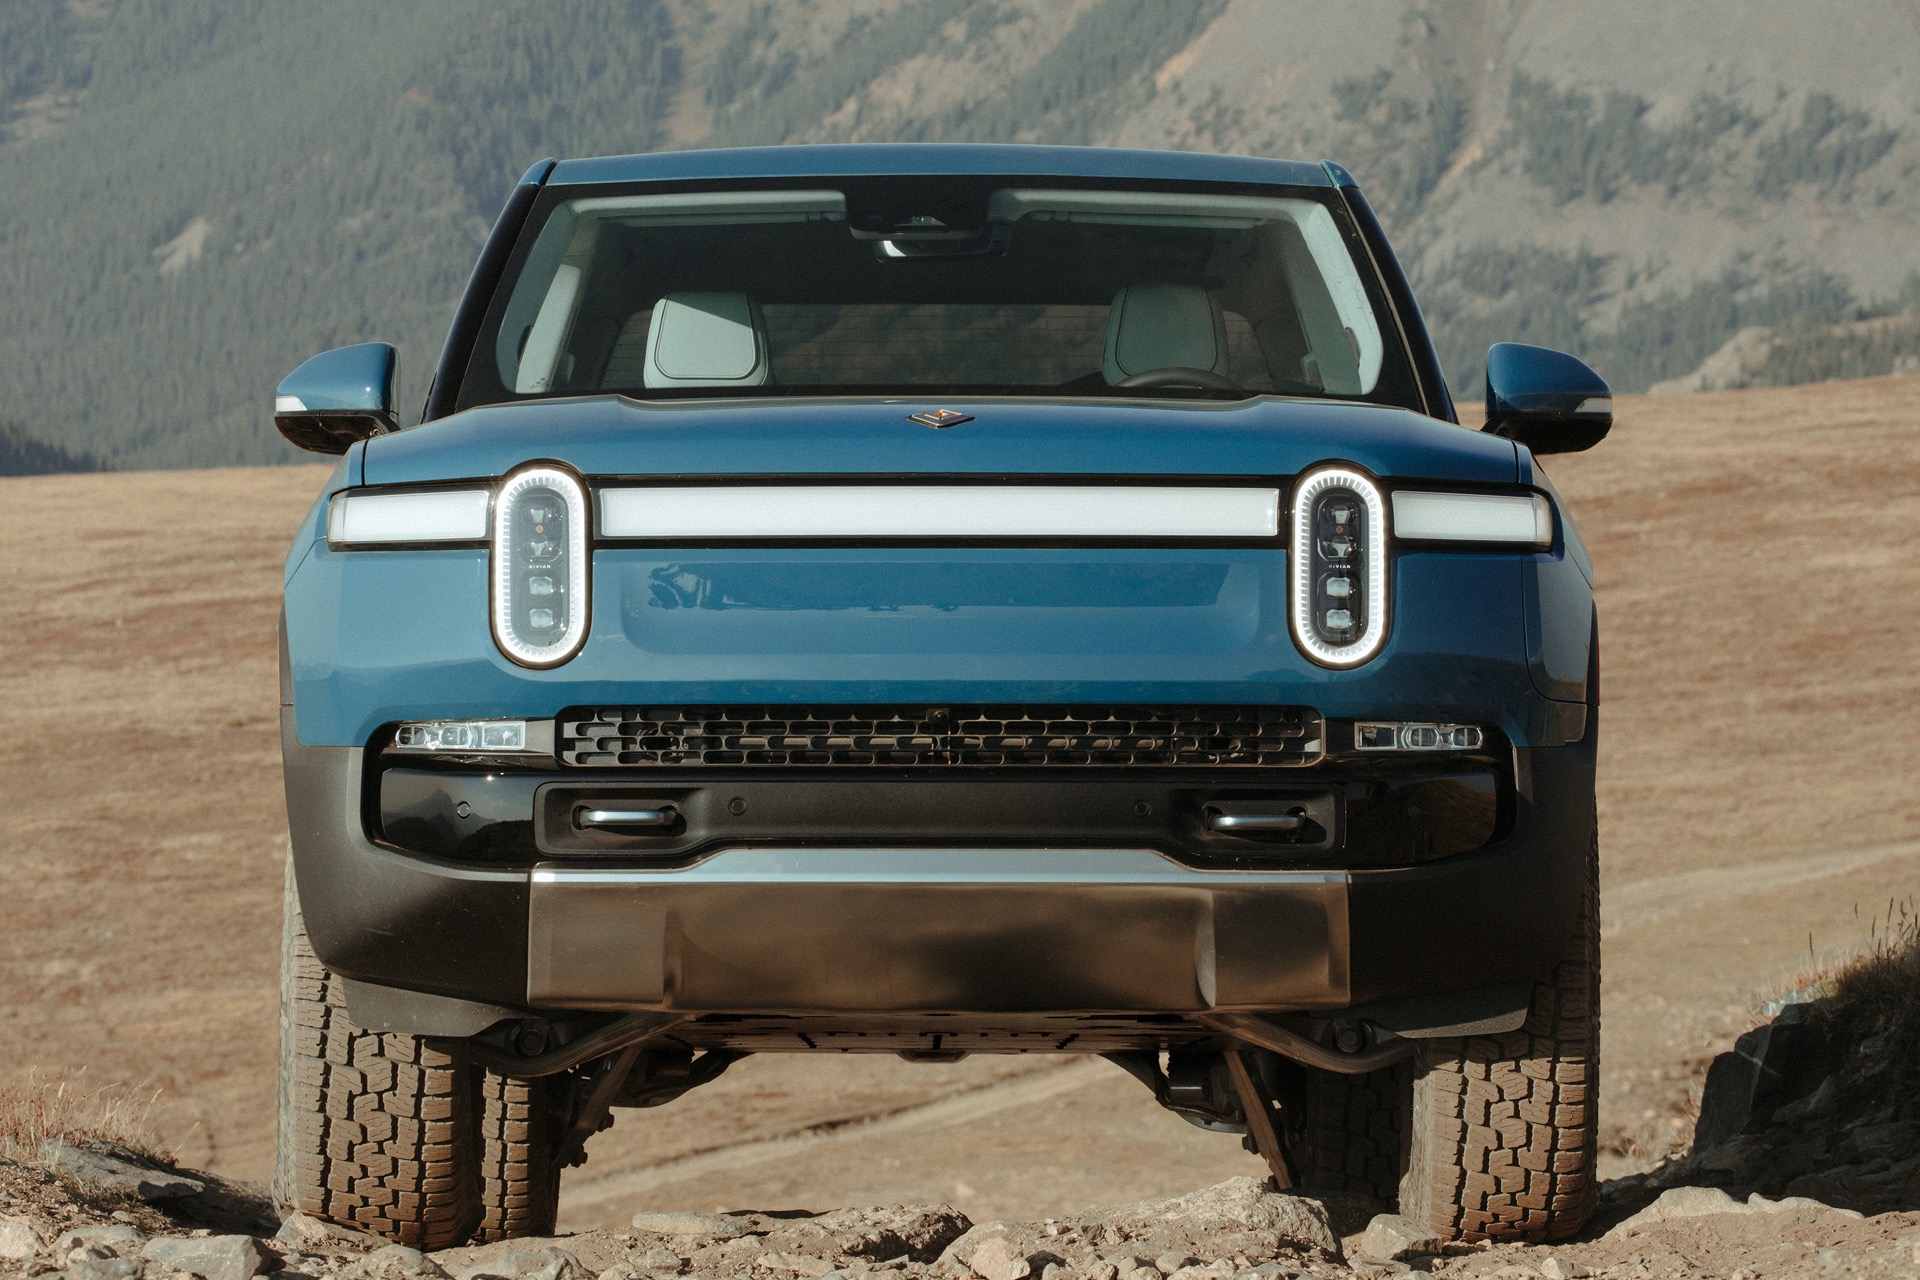 Rivian CEO previews new Camp Mode designed to automatically level vehicle at campsite Auto Recent